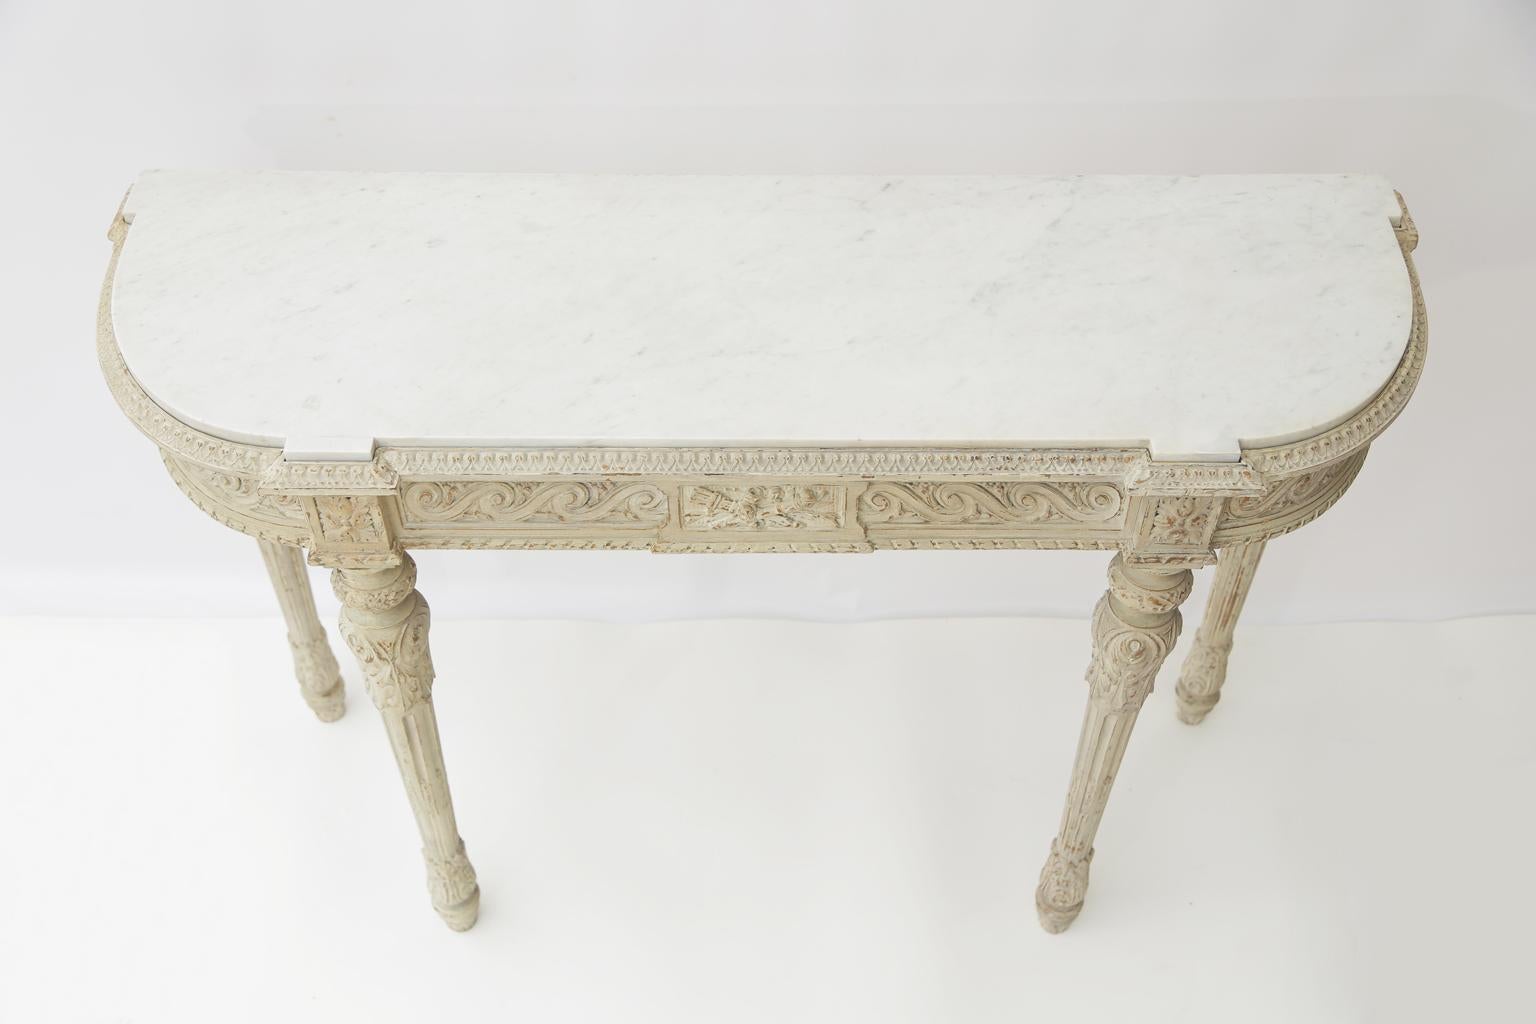 Carved and Painted 19th Century Belgian Console Table with Carrara Marble Top For Sale 4